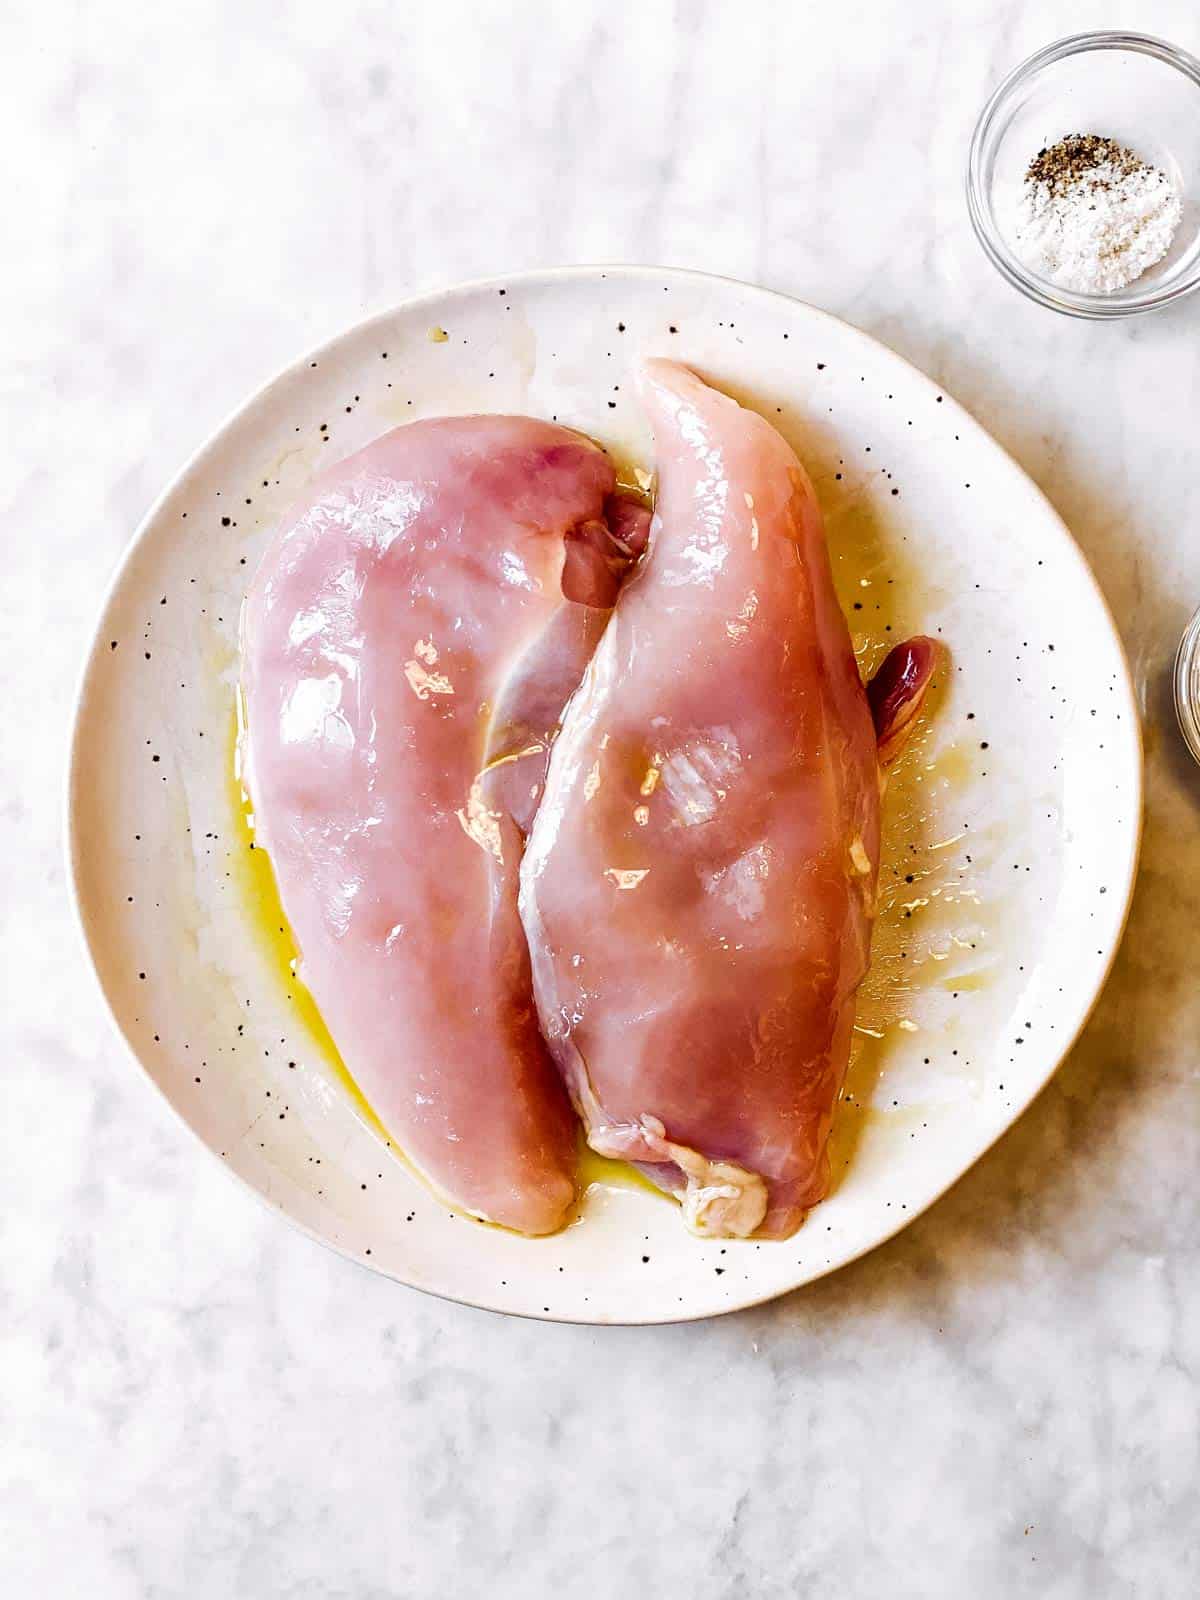 raw chicken breasts coated in olive oil on white plate